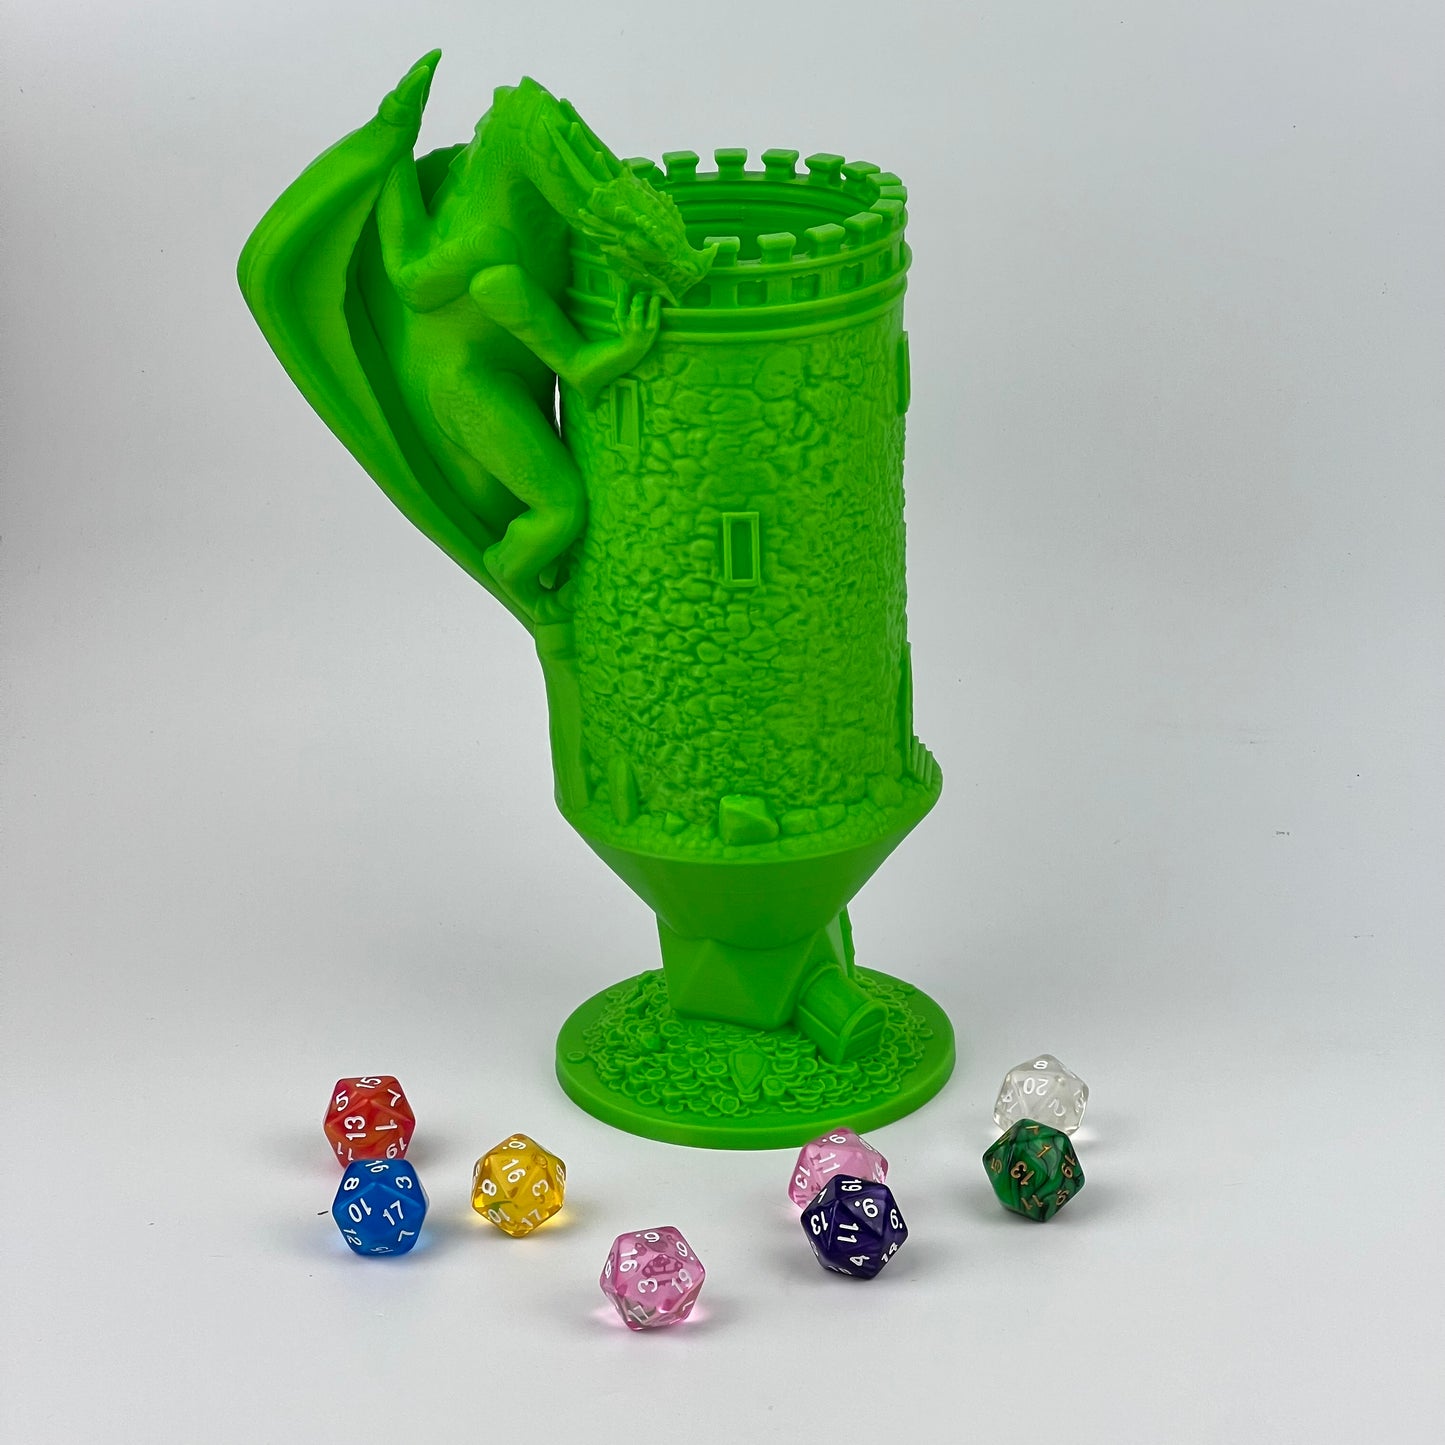 The Game Master Mythic Mugs Dice Holder GST3d (Best for Painting)